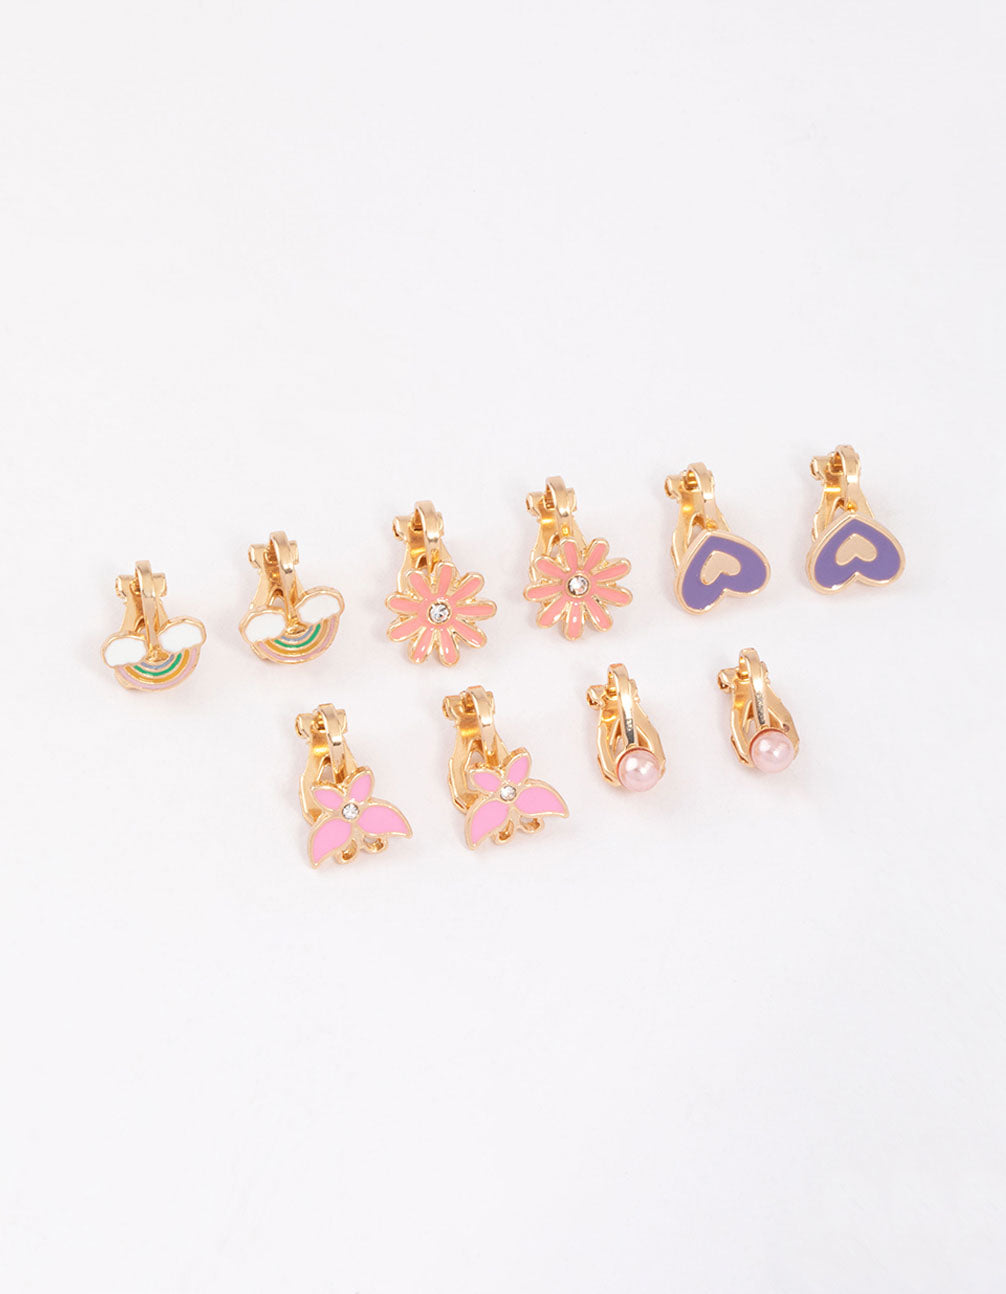 LNKOO 7 Pairs Girls Clip On Earrings Cute Dangle Drop Clip-on Earrings for  Girls Non Piercing Earrings Jewelry Set for Little Girls Fruit and Acrylic  Princess Earrings With Storage Box for Kids -